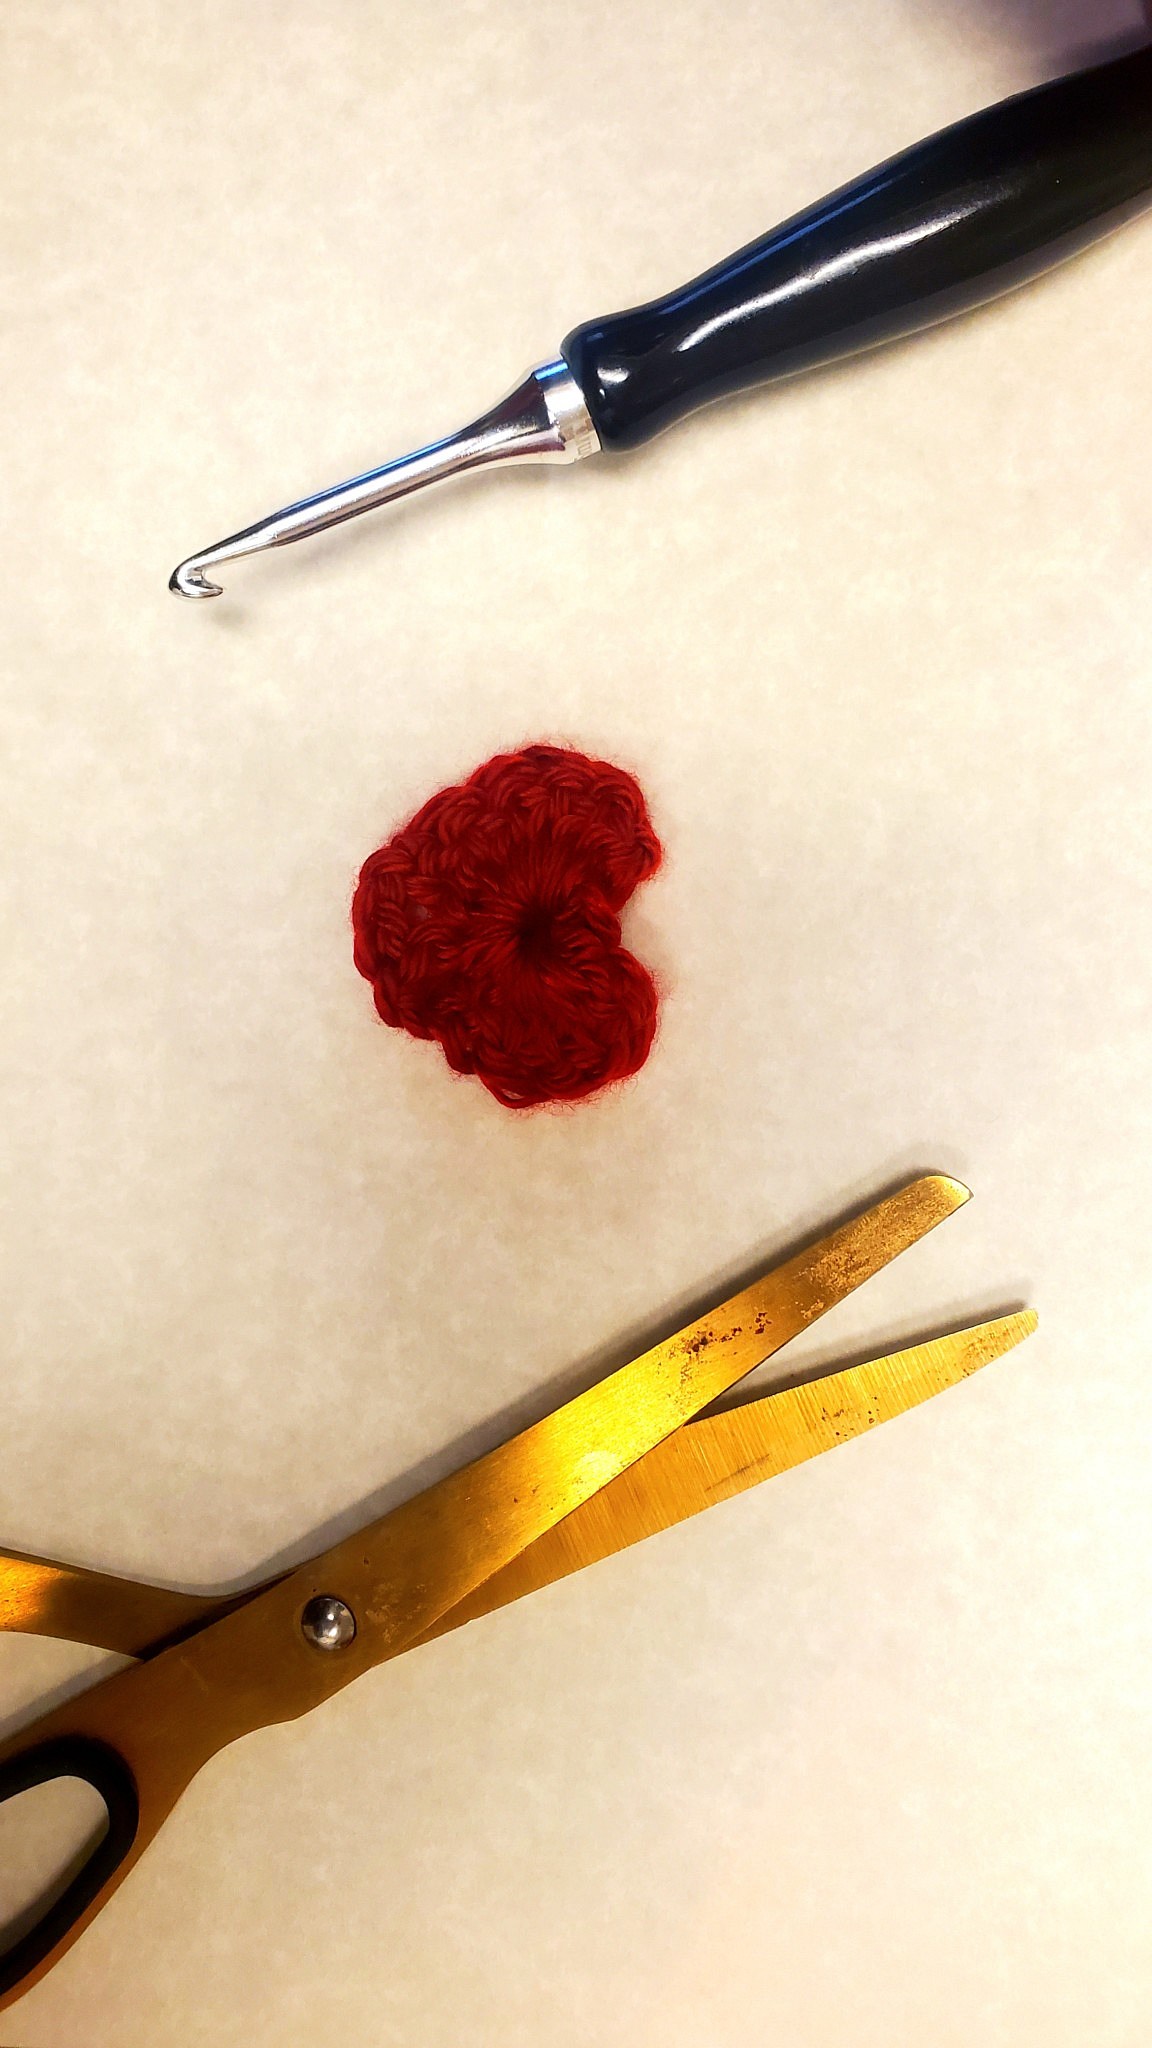 Stitched with love: A crochet tutorial courtesy of the Patchwork Pals